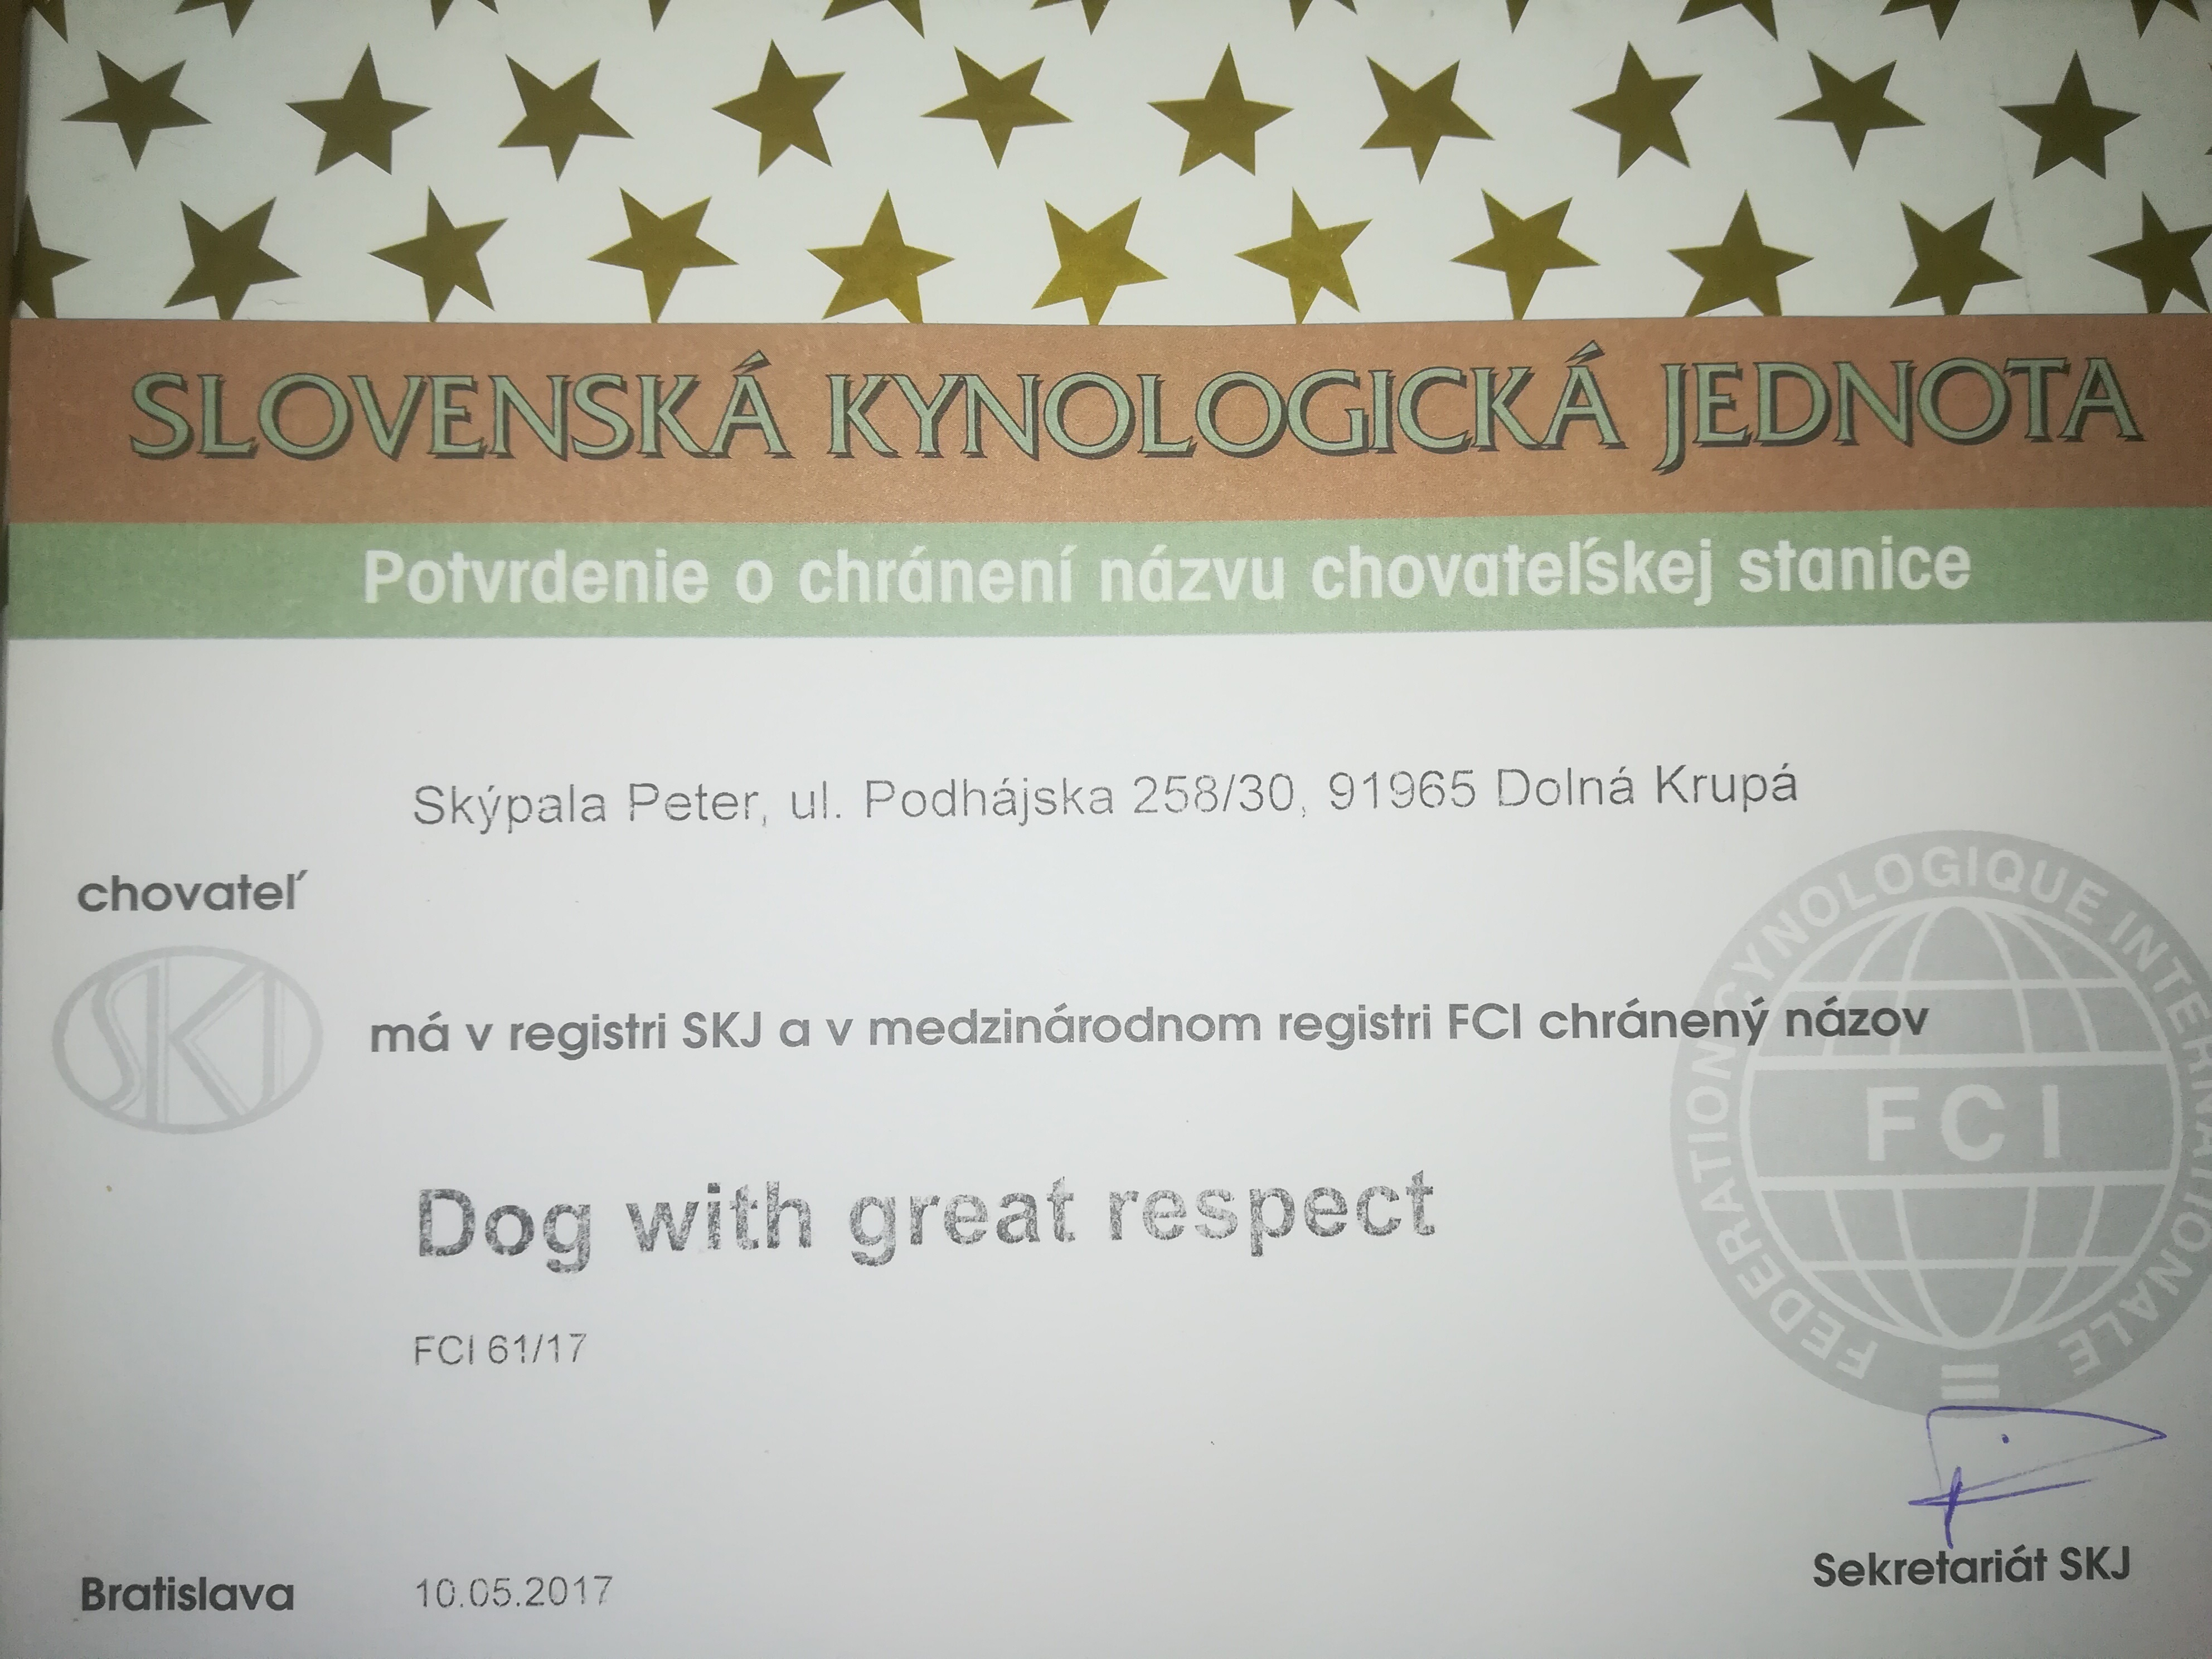 Dog with great respect